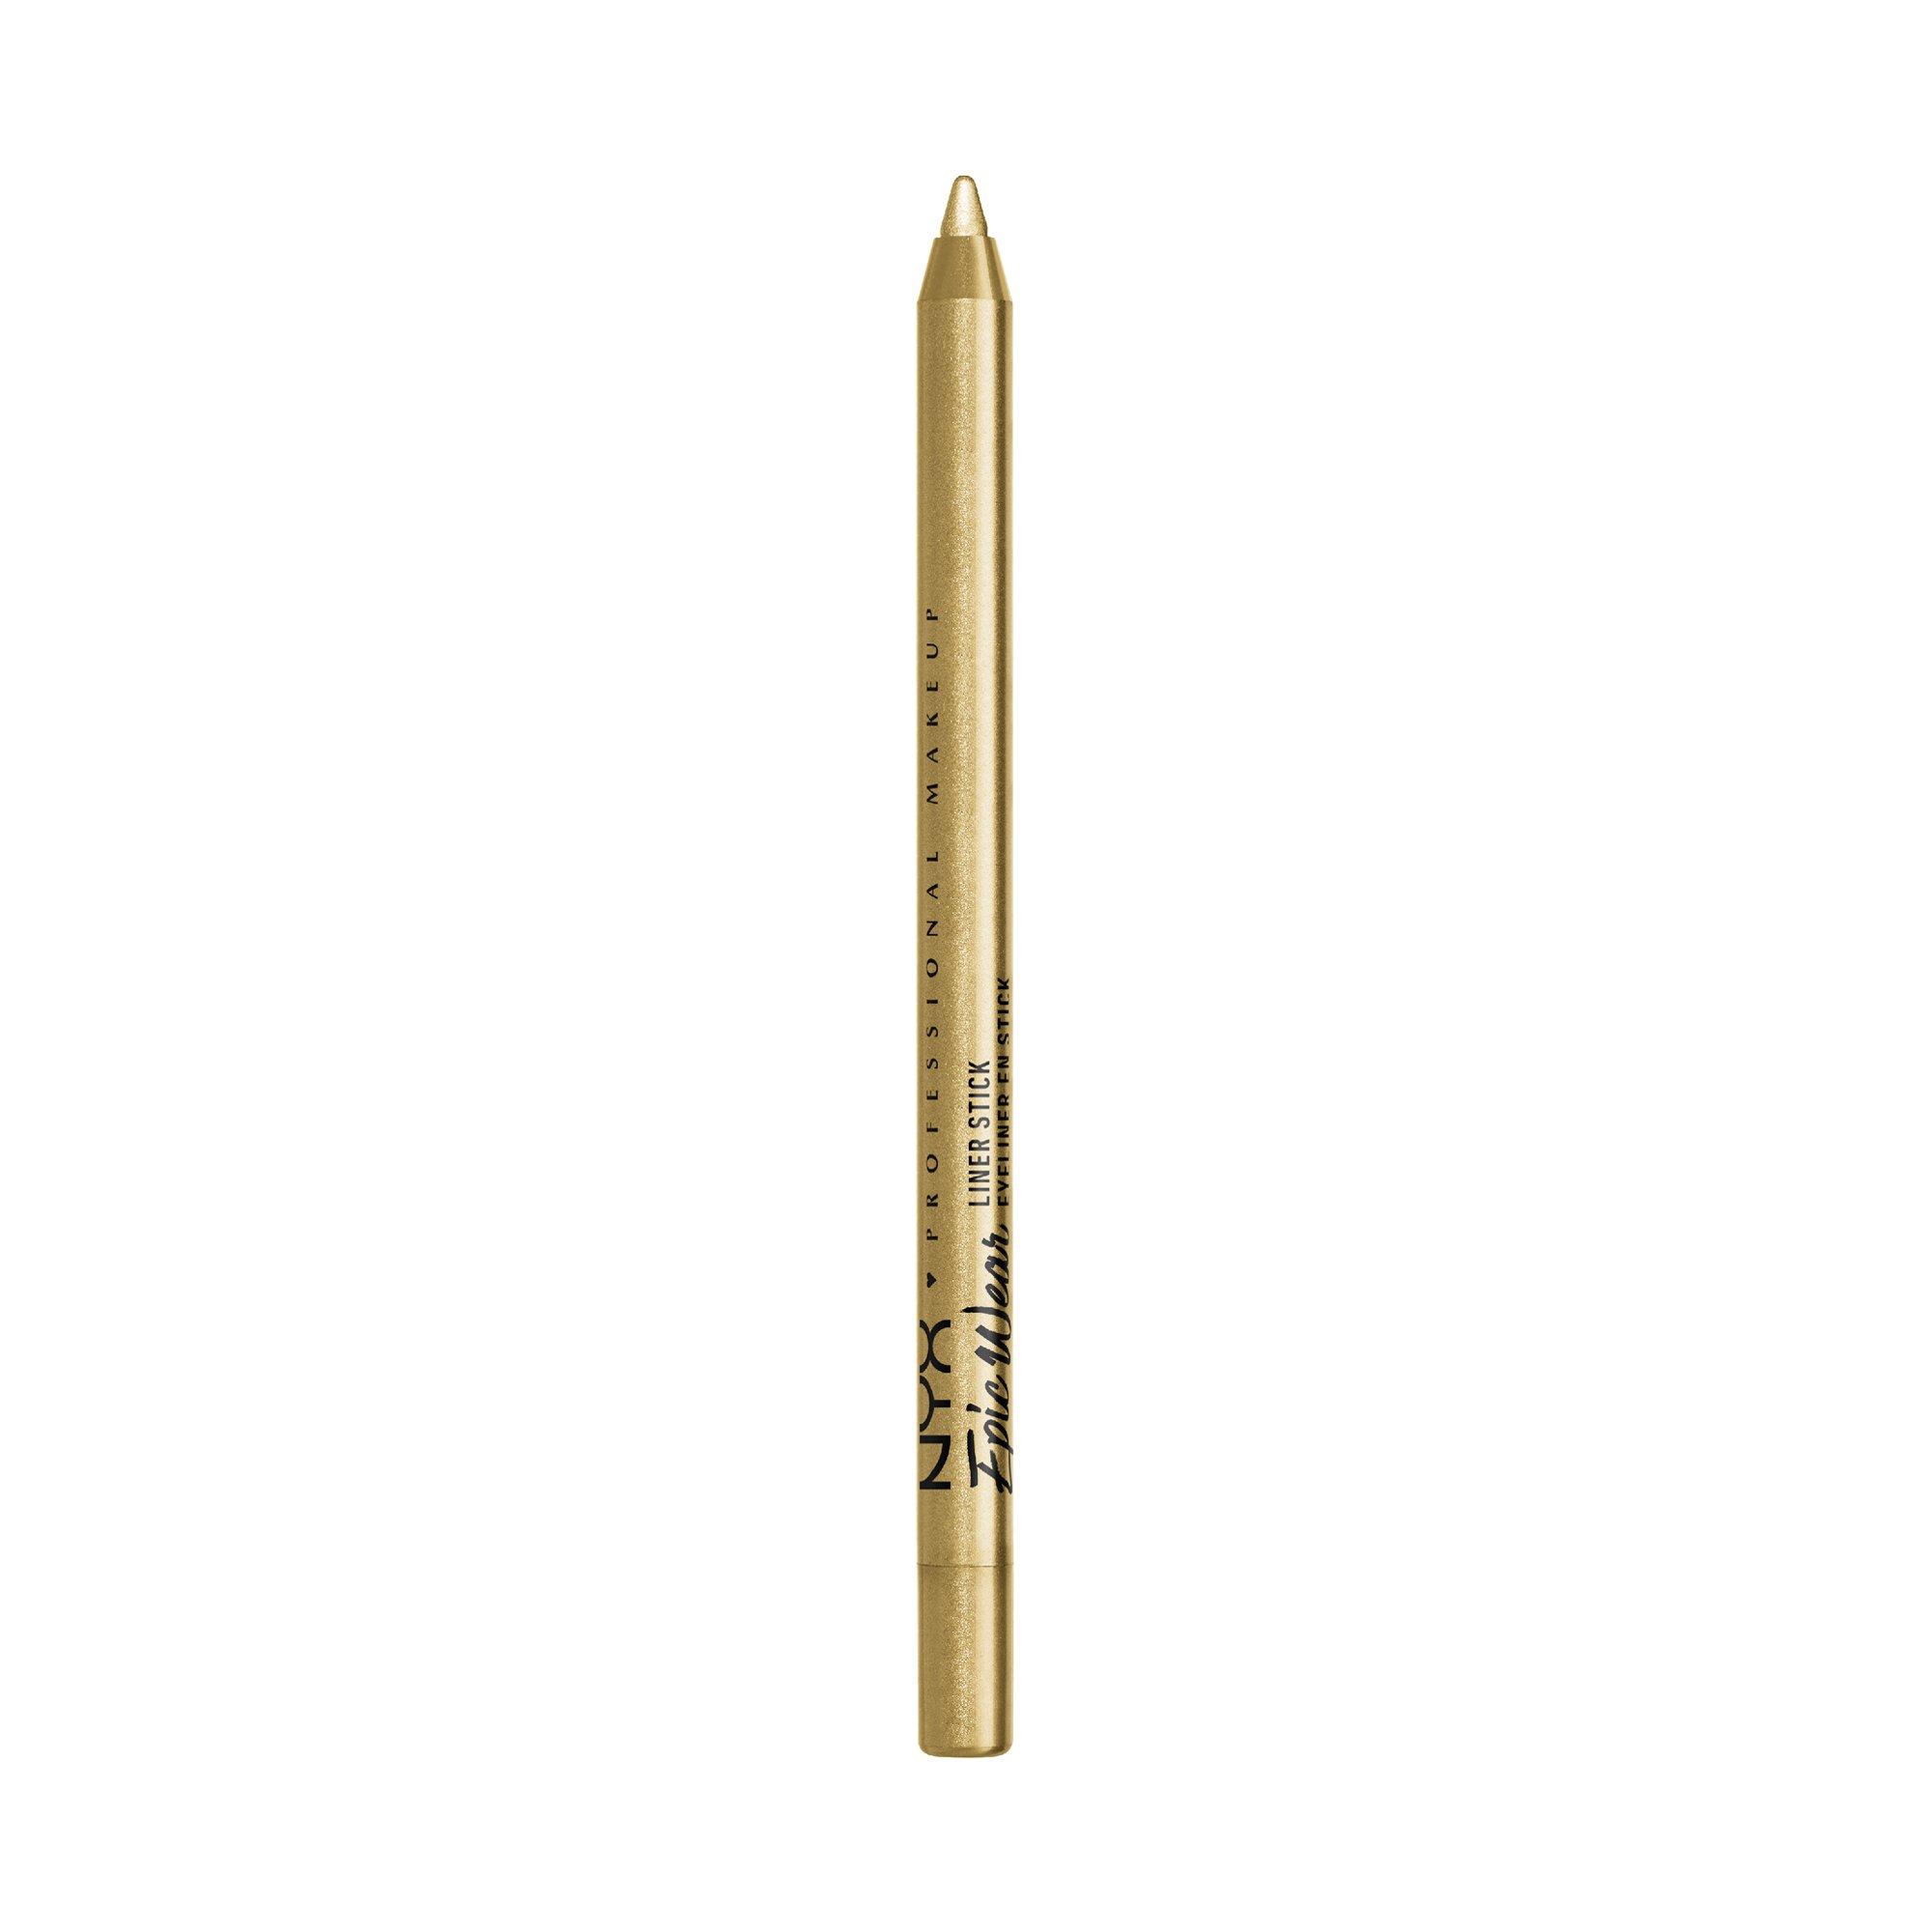 Image of NYX-PROFESSIONAL-MAKEUP Epic Wear Liner Stick Epic Wear Liner Stick, Eyeliner - 1.2g